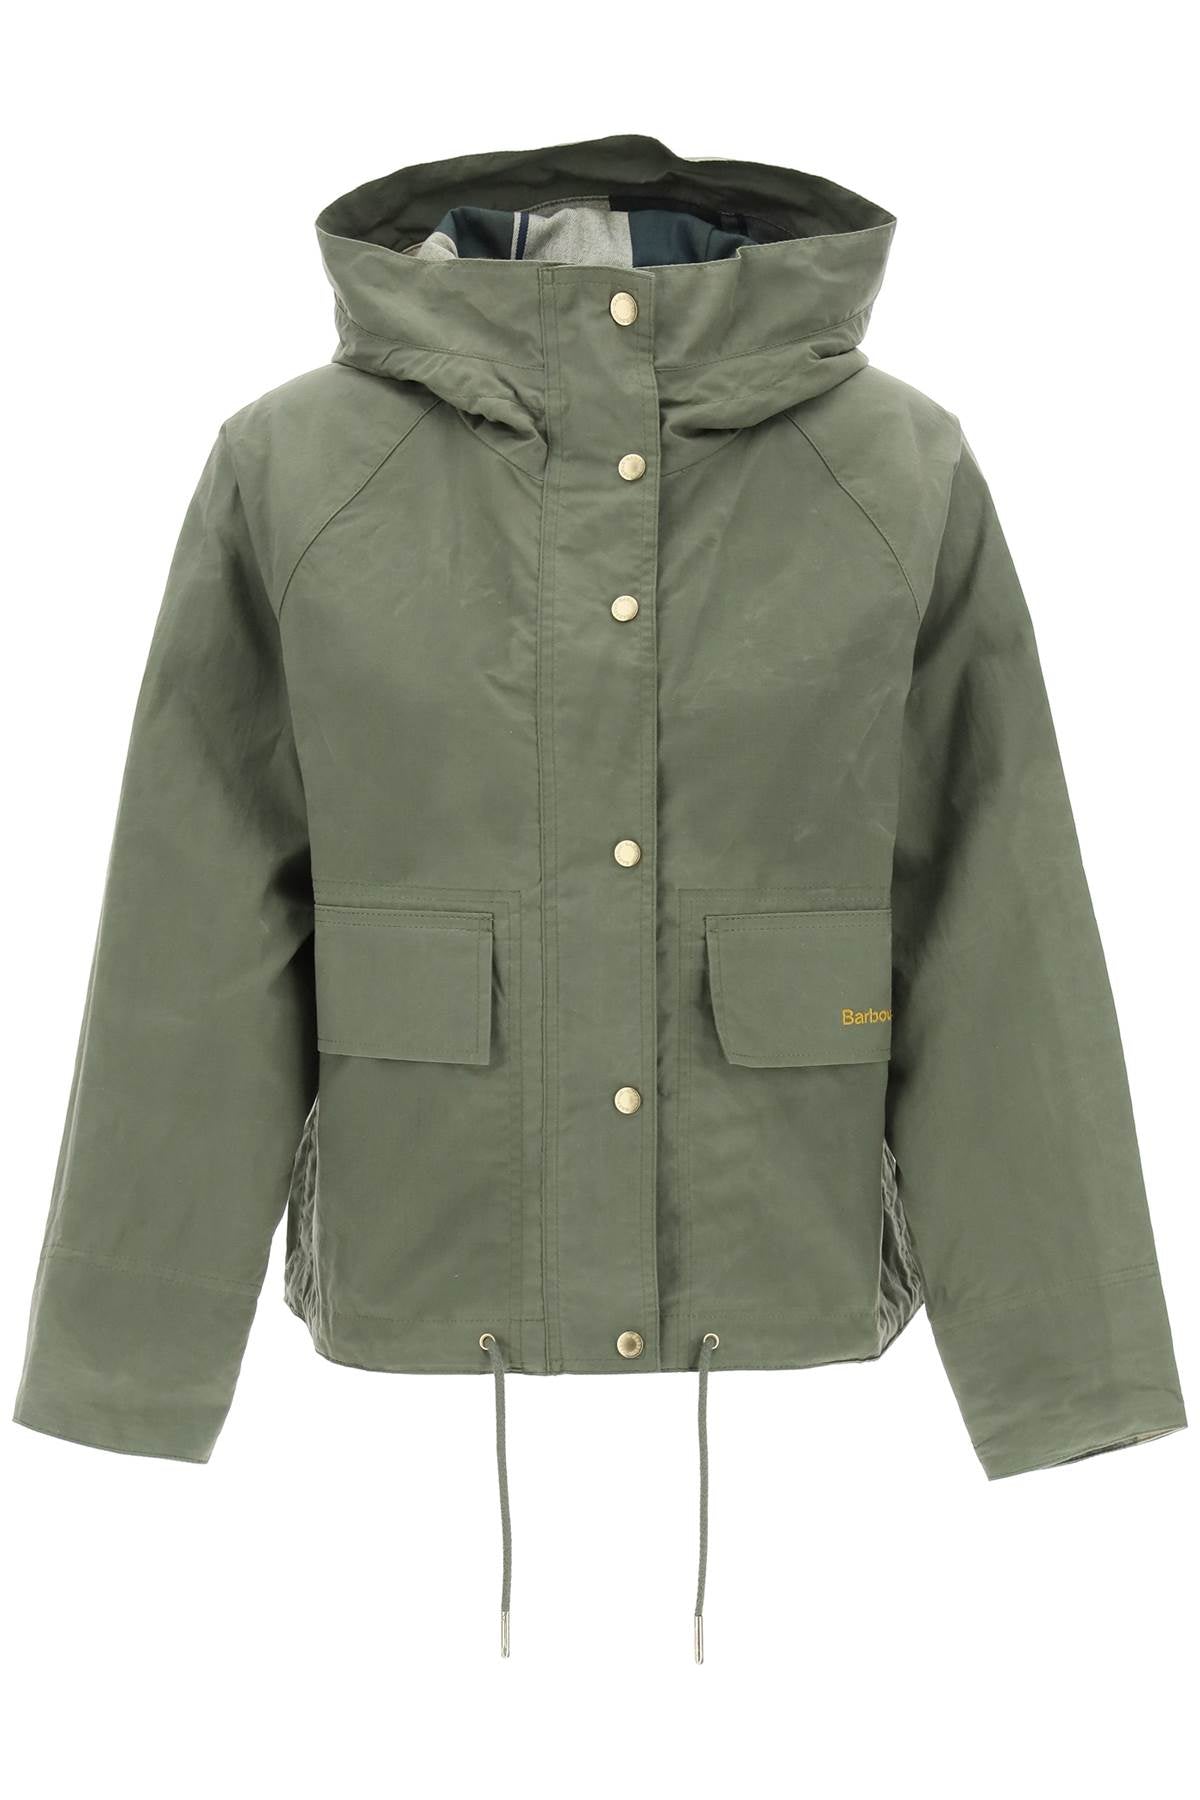 Barbour nith hooded jacket with-0